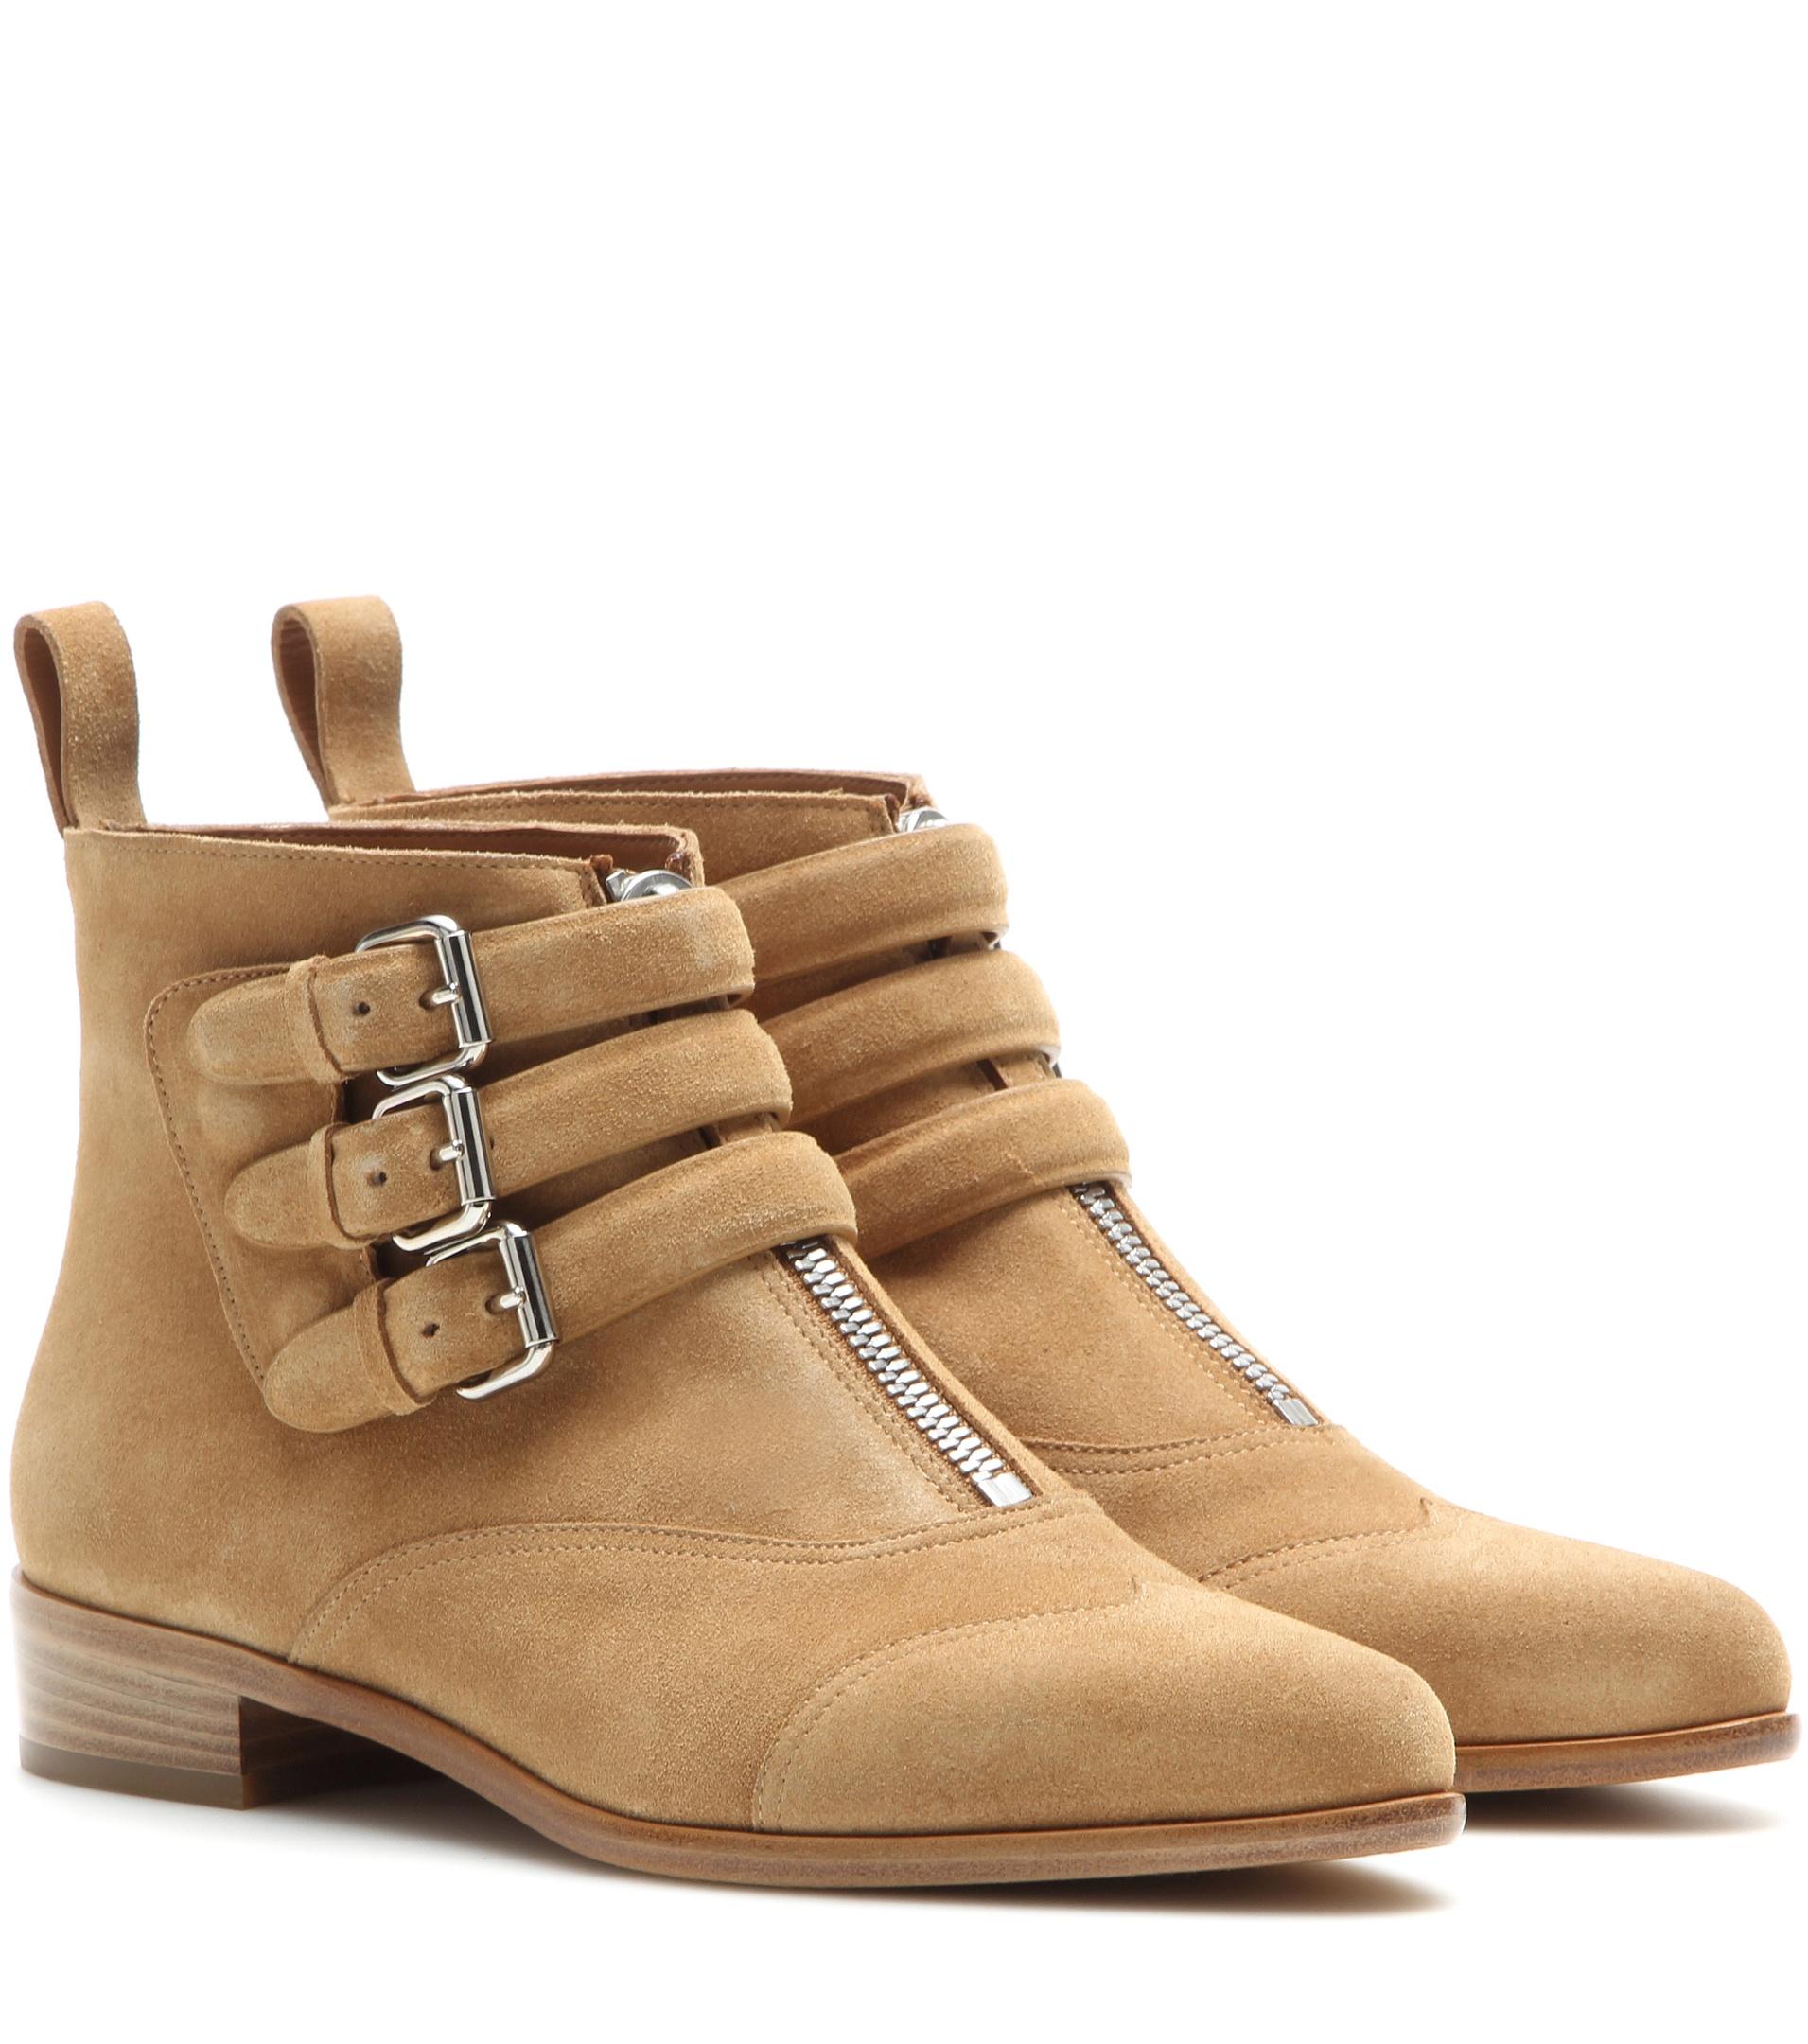 Lyst Tabitha Simmons TripleBuckled Suede Ankle Boots in